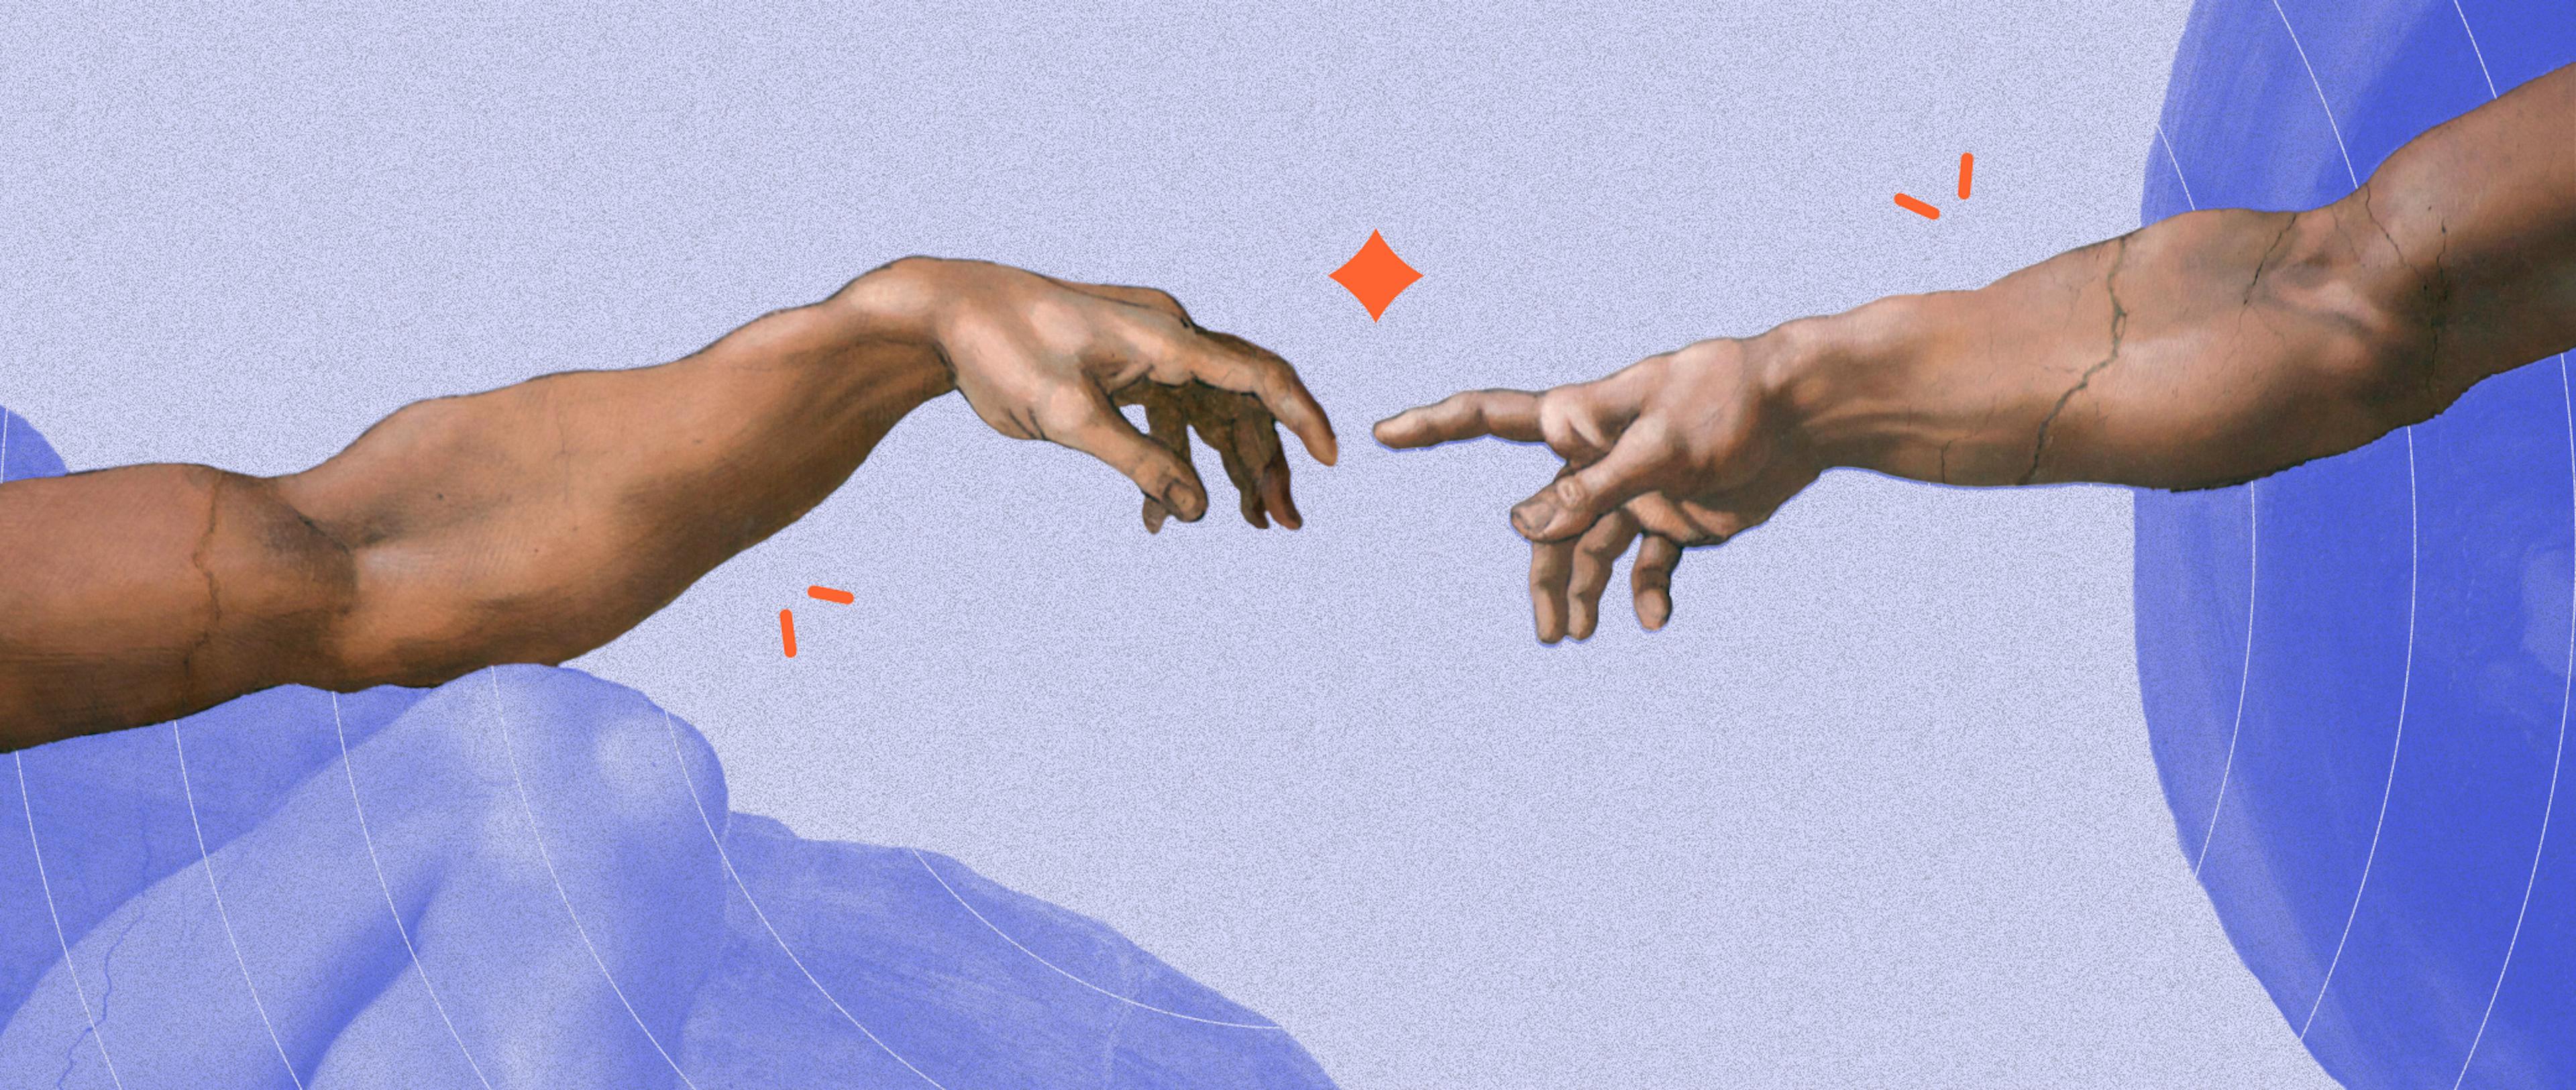 An iteration of Michael Angelo's Sistine Chapel painting representing connection between friends and how they can help the other's mental health